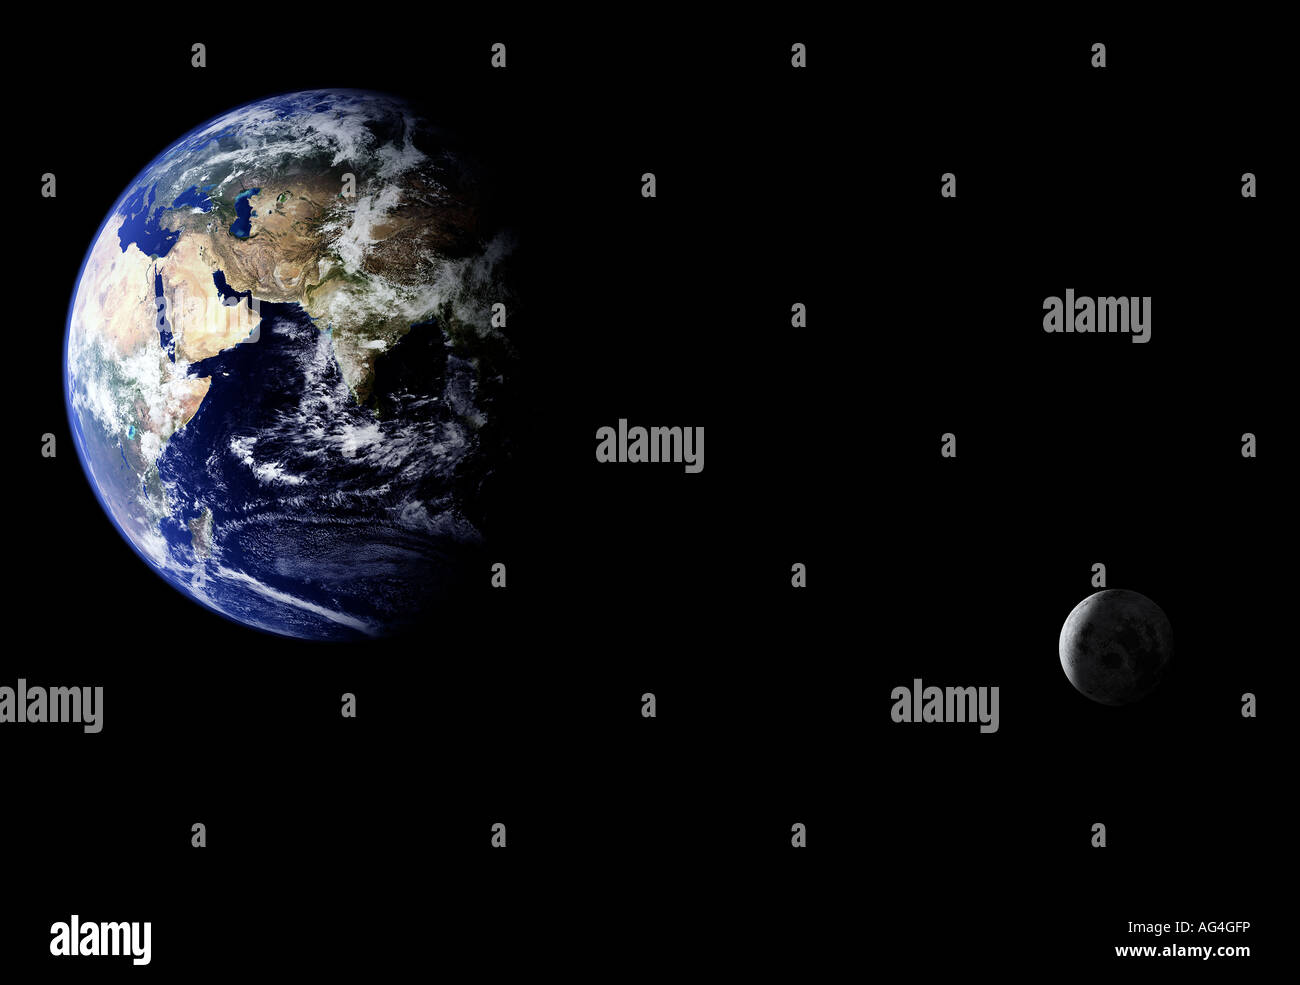 Composite image of earth and moon Moon orbiting earth. Stock Photo